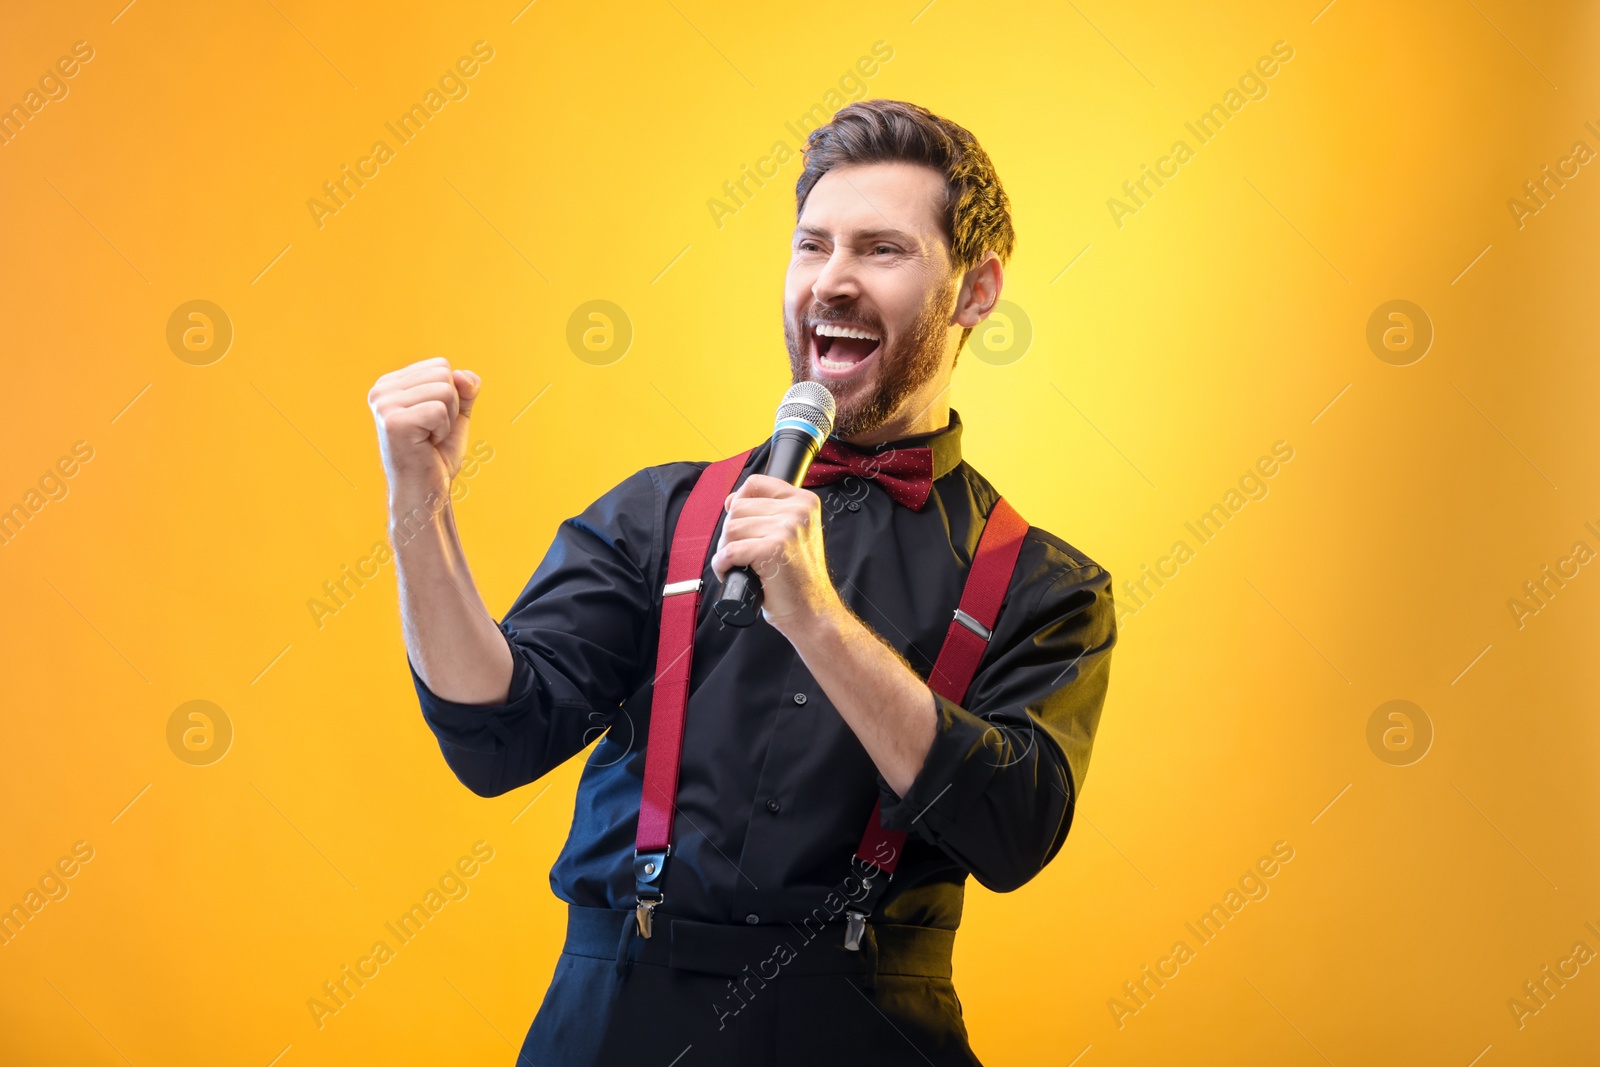 Photo of Emotional man with microphone singing on yellow background